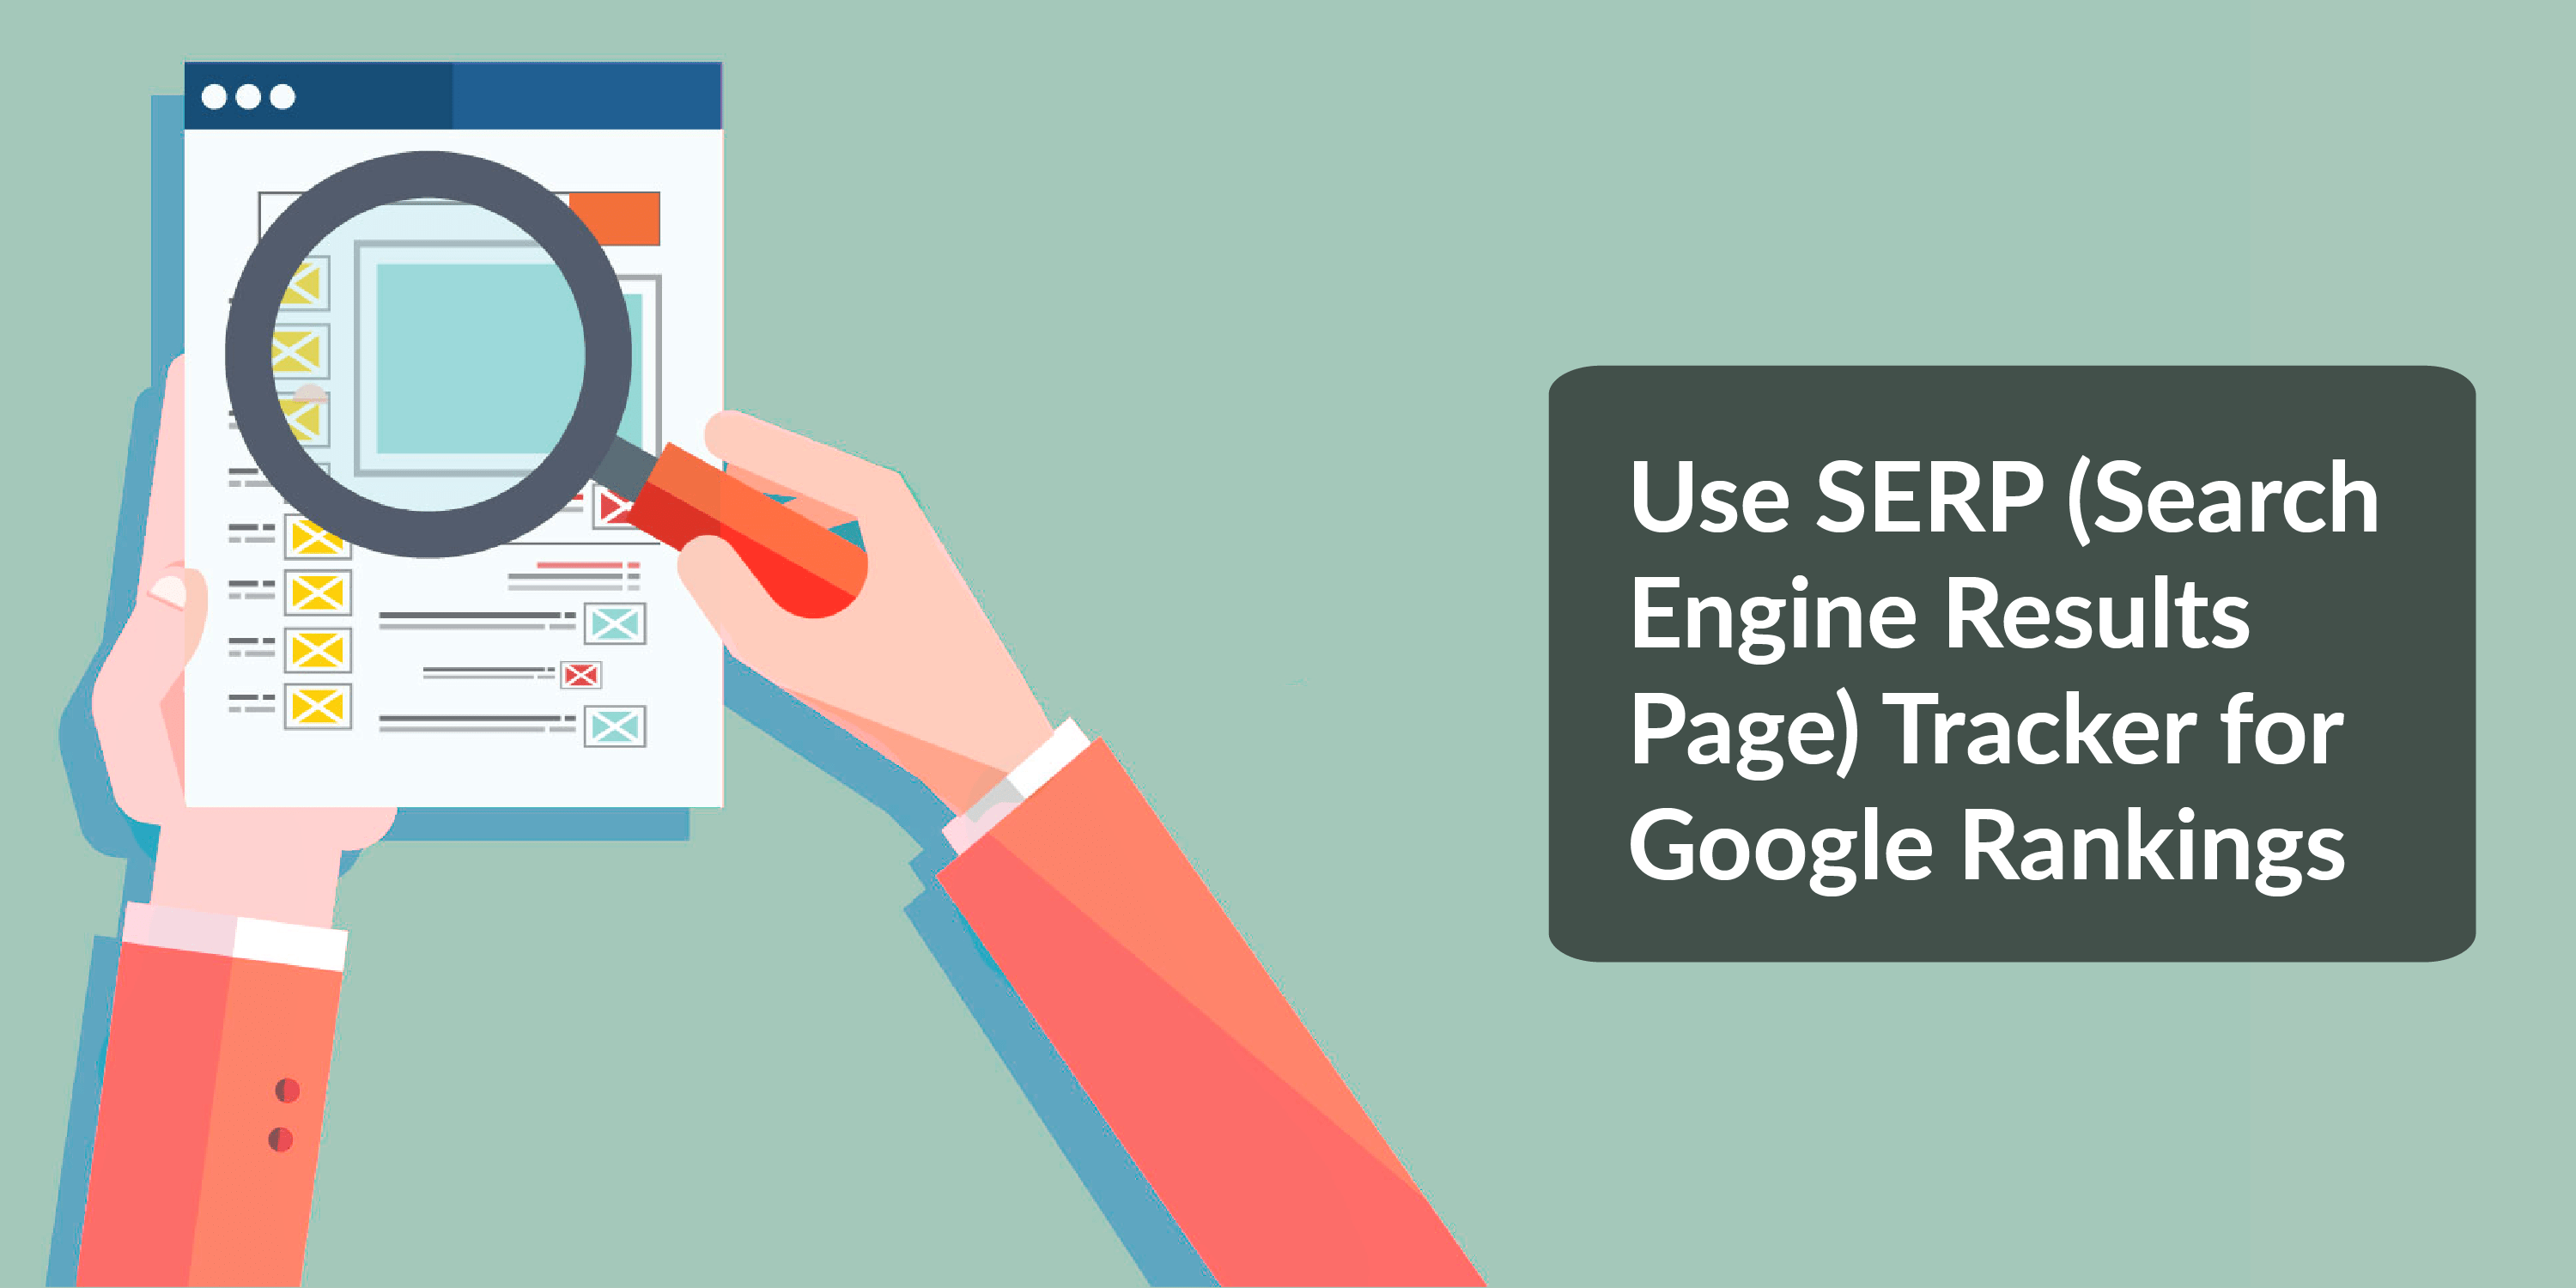 USE SERP (SEARCH ENGINE RESULTS PAGE) TRACKER FOR GOOGLE RANKINGS